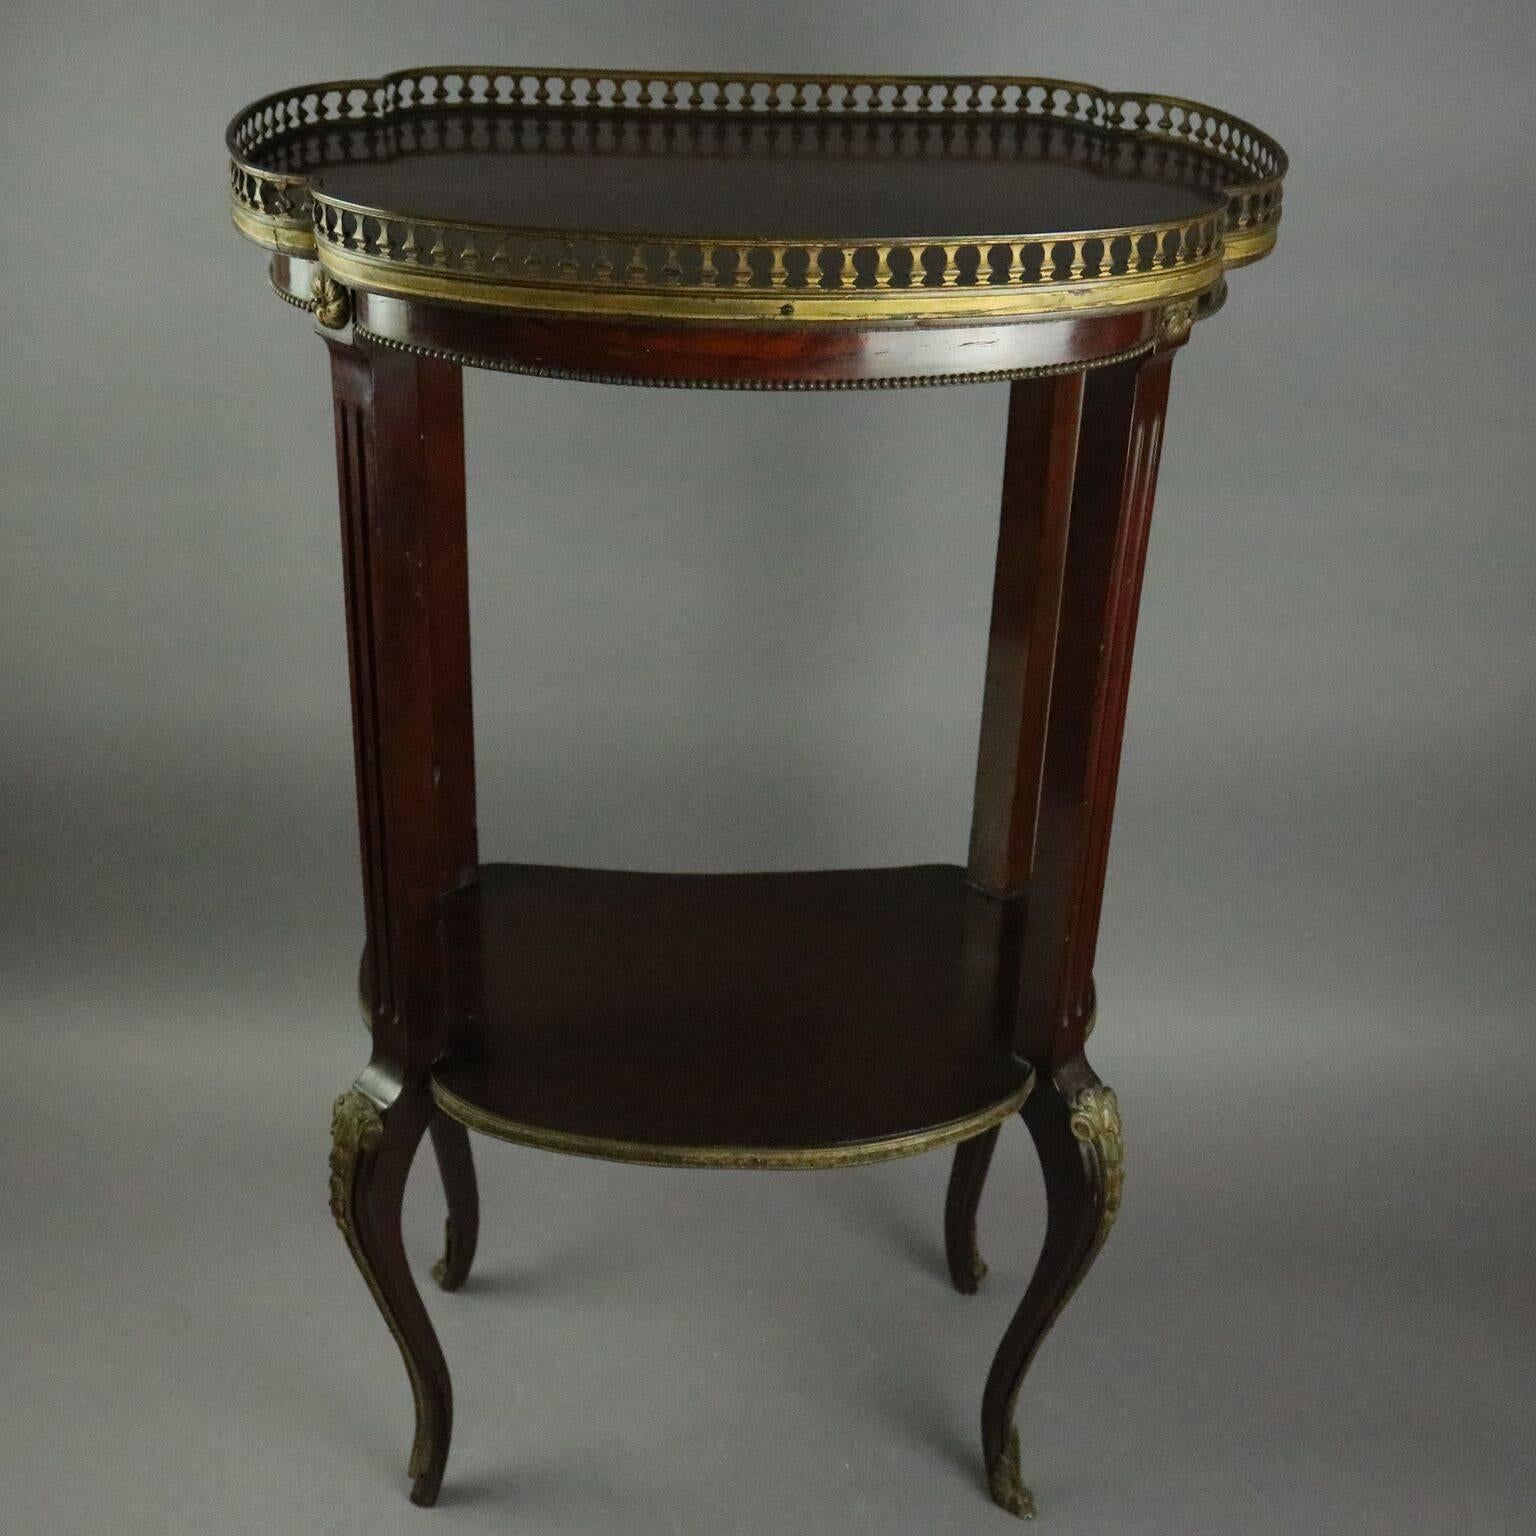 Antique French Louis XIV style sculpture stand features mahogany construction with bowed front and sides, open central gallery, reeded supports terminating in cabriole legs, bonze accoutrements include pierced gallery, rosettes, acanthus on knees